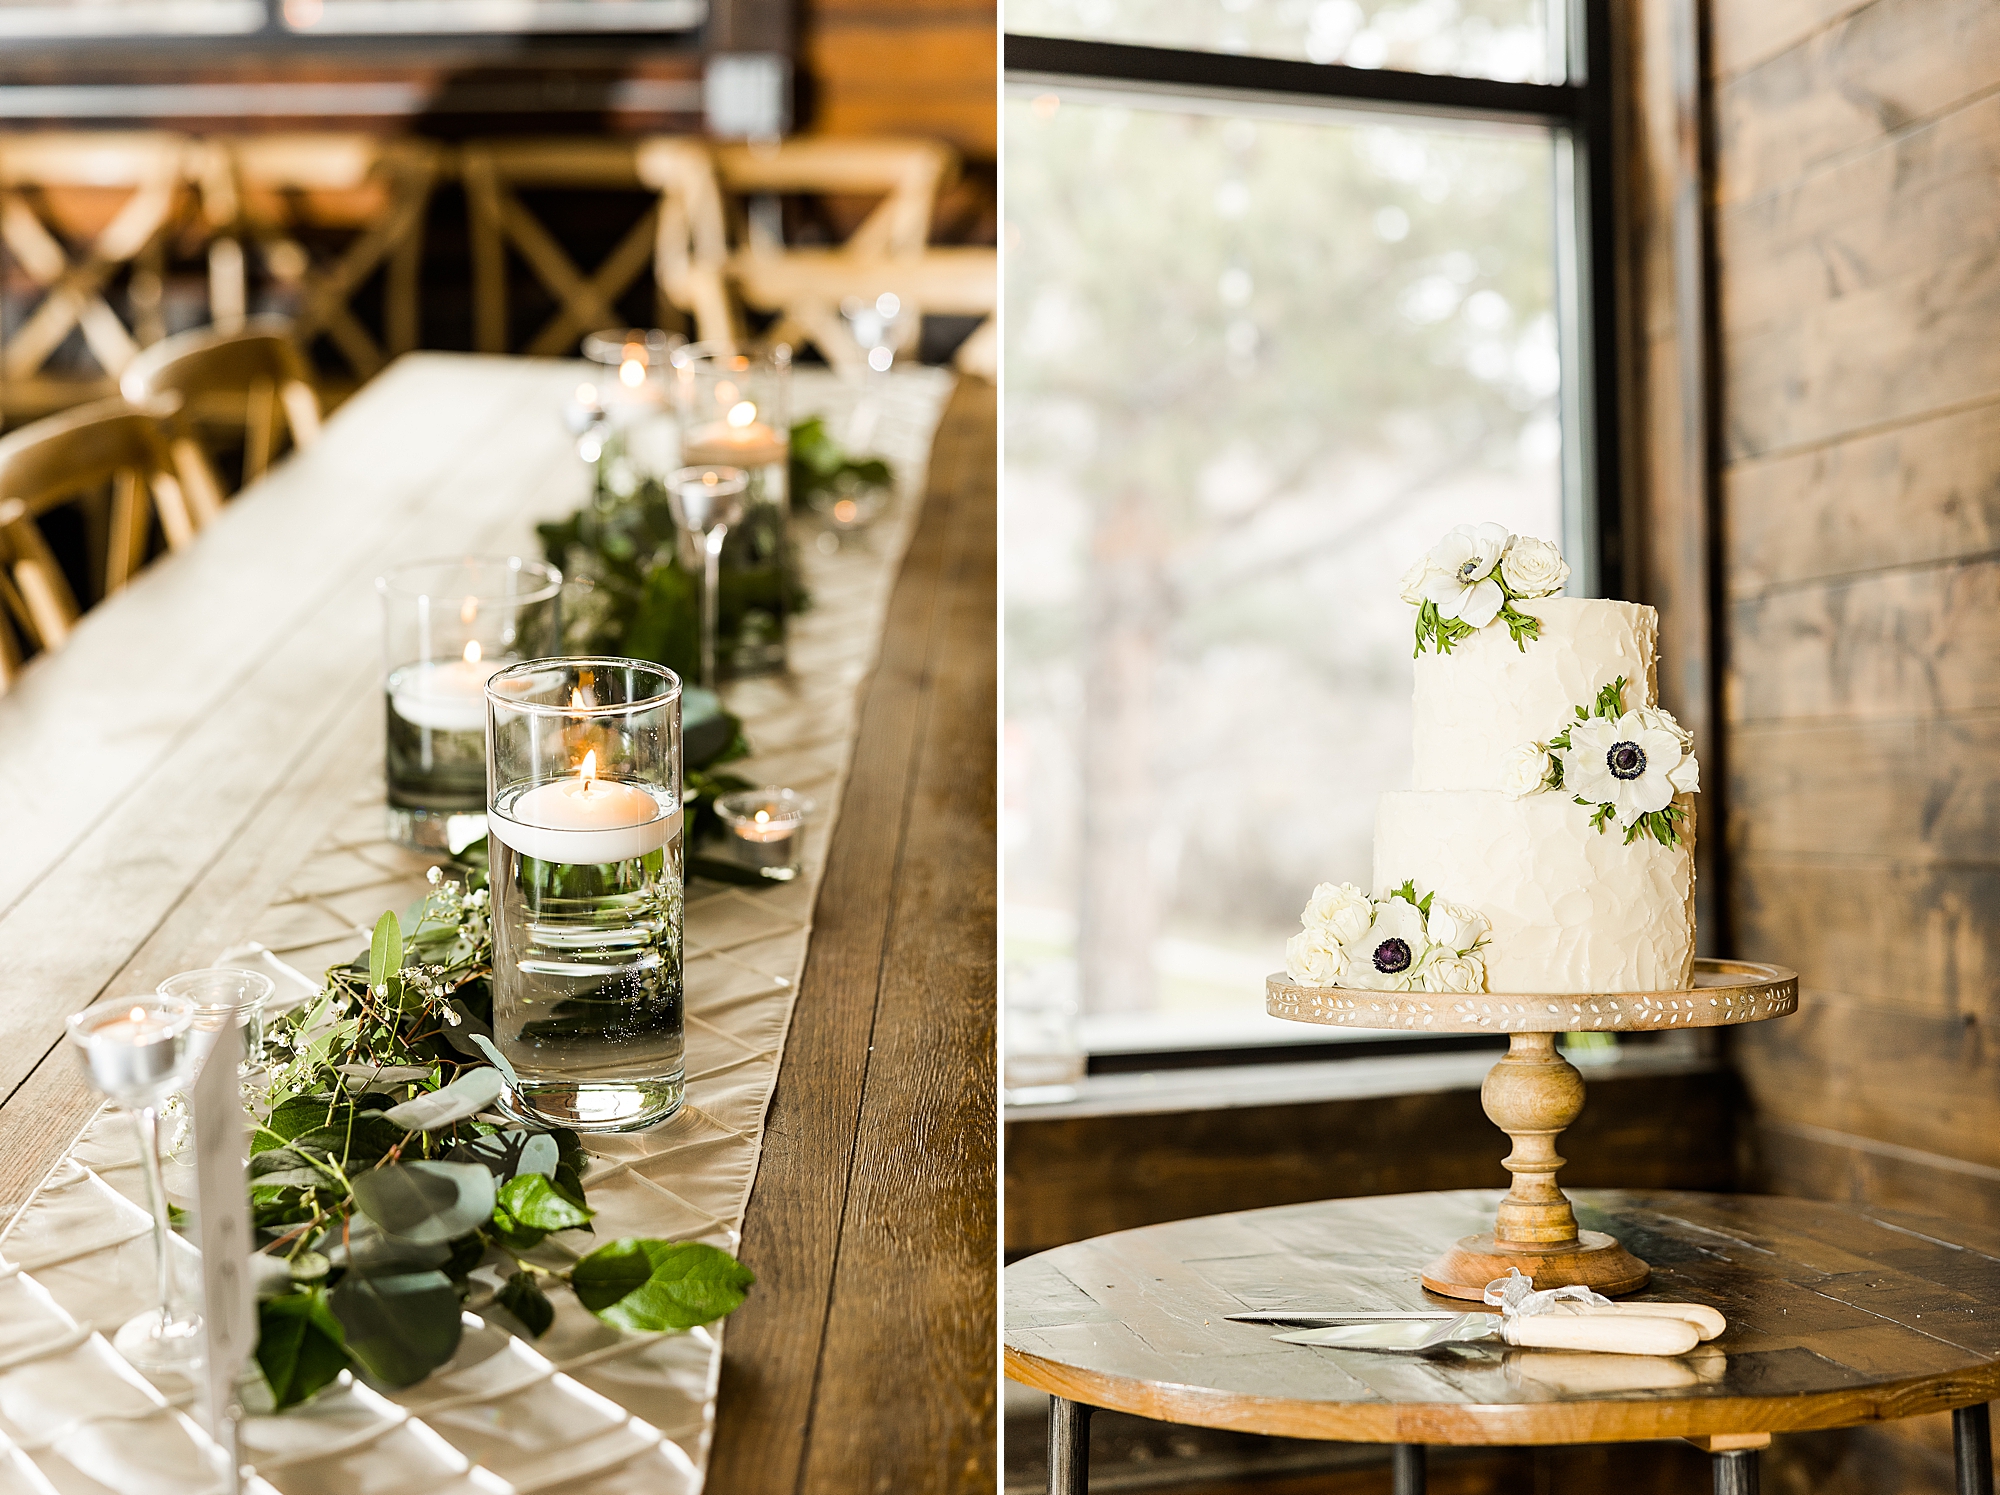 Reception table set with white linens, greenery centerpieces, and gold accents
